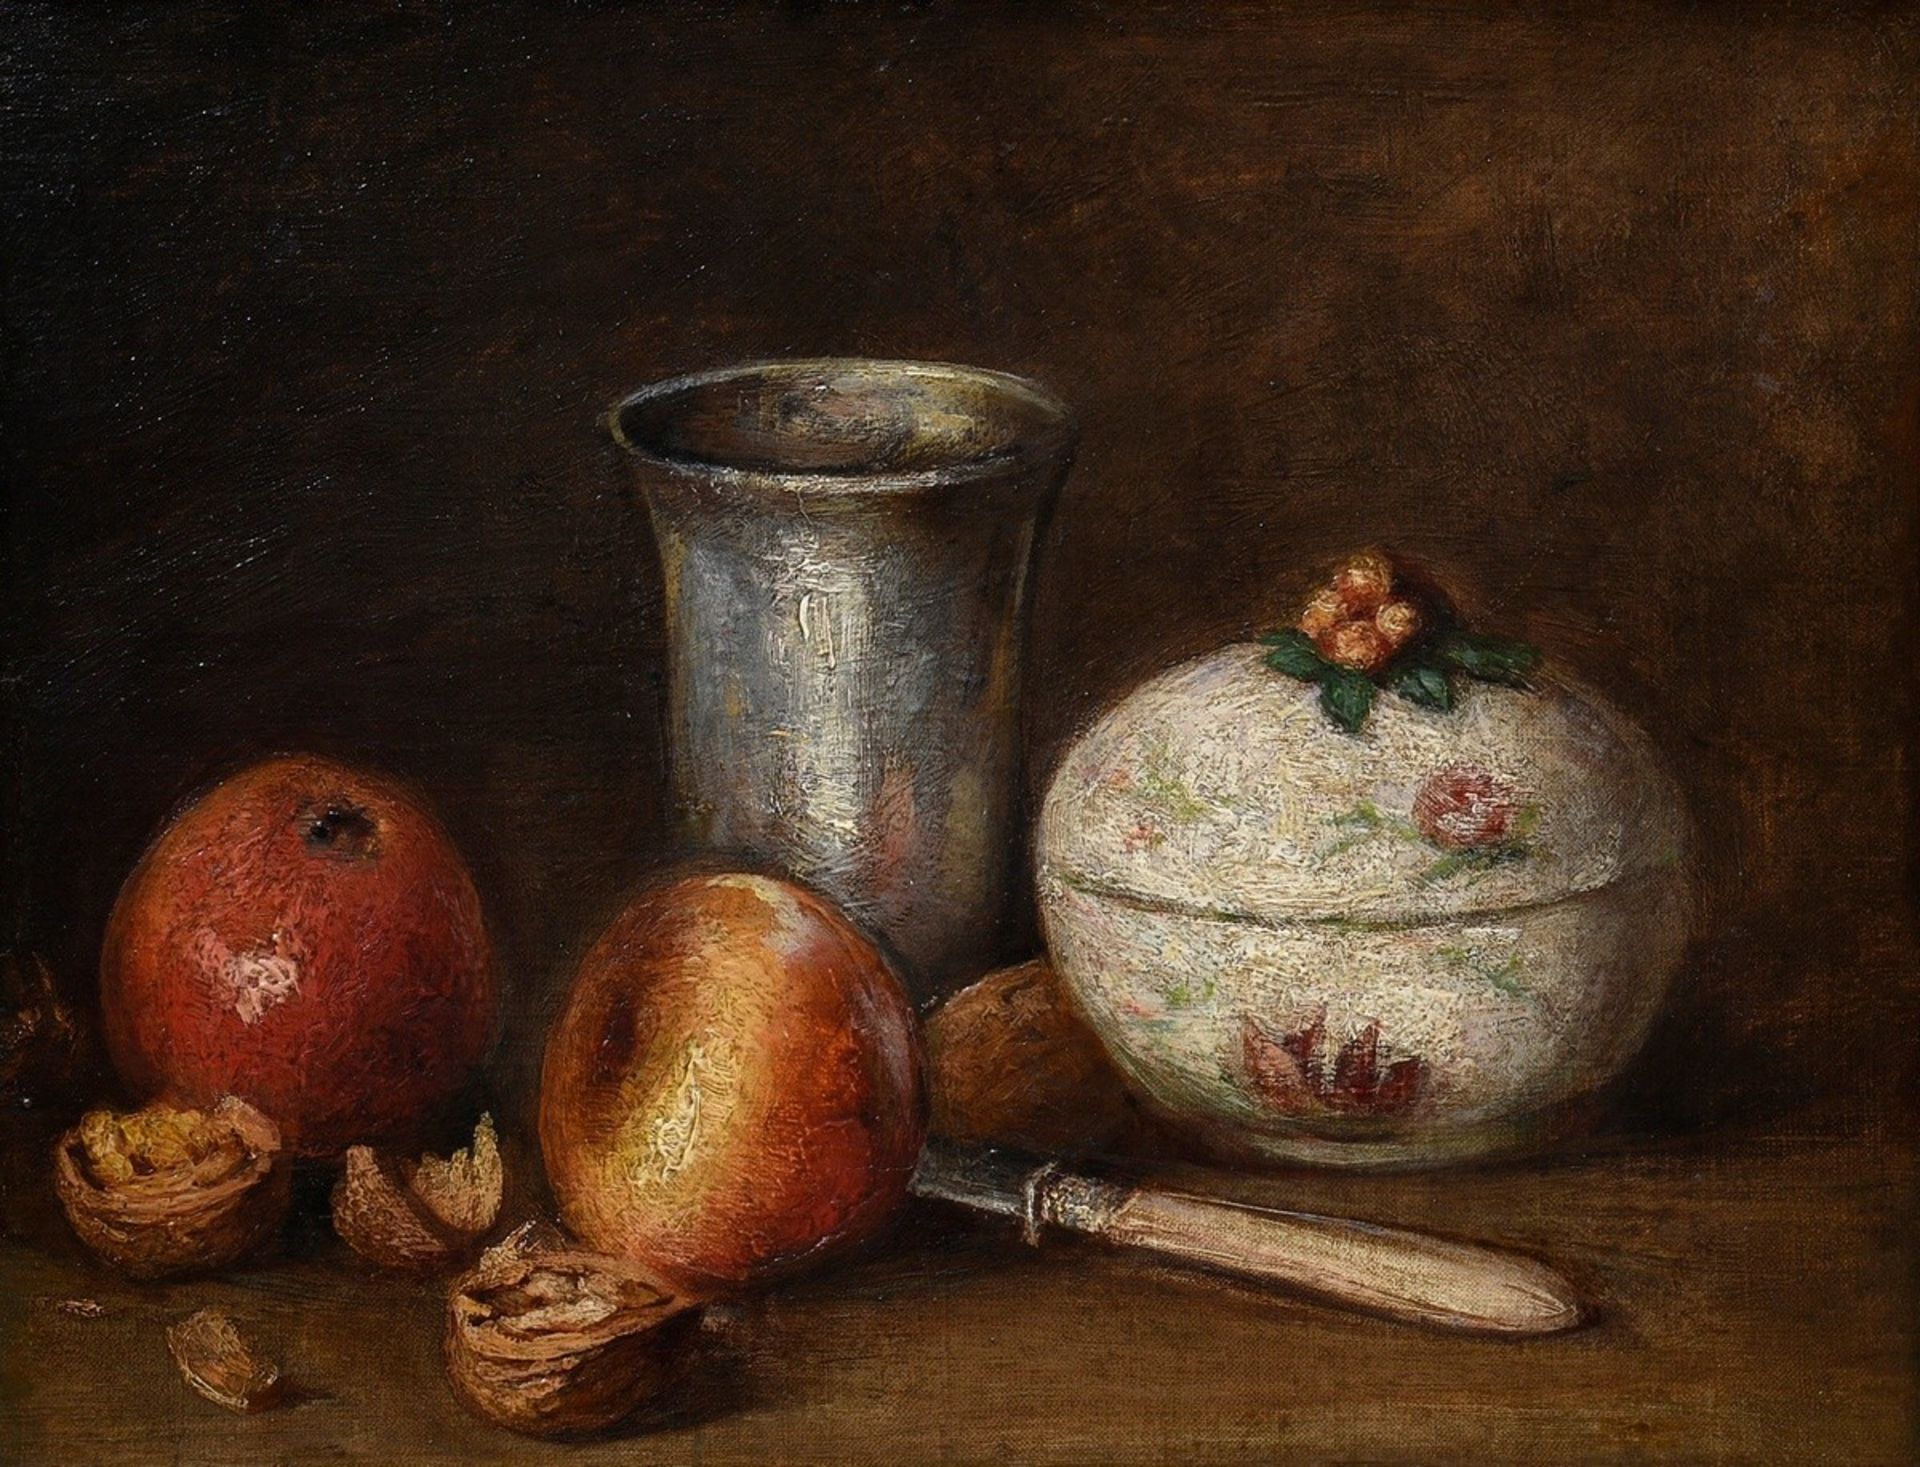 Dujardin, Edward (1817-1889) attributed "Fruit Still Life with Silver Cup and Porcelain Box", oil/c